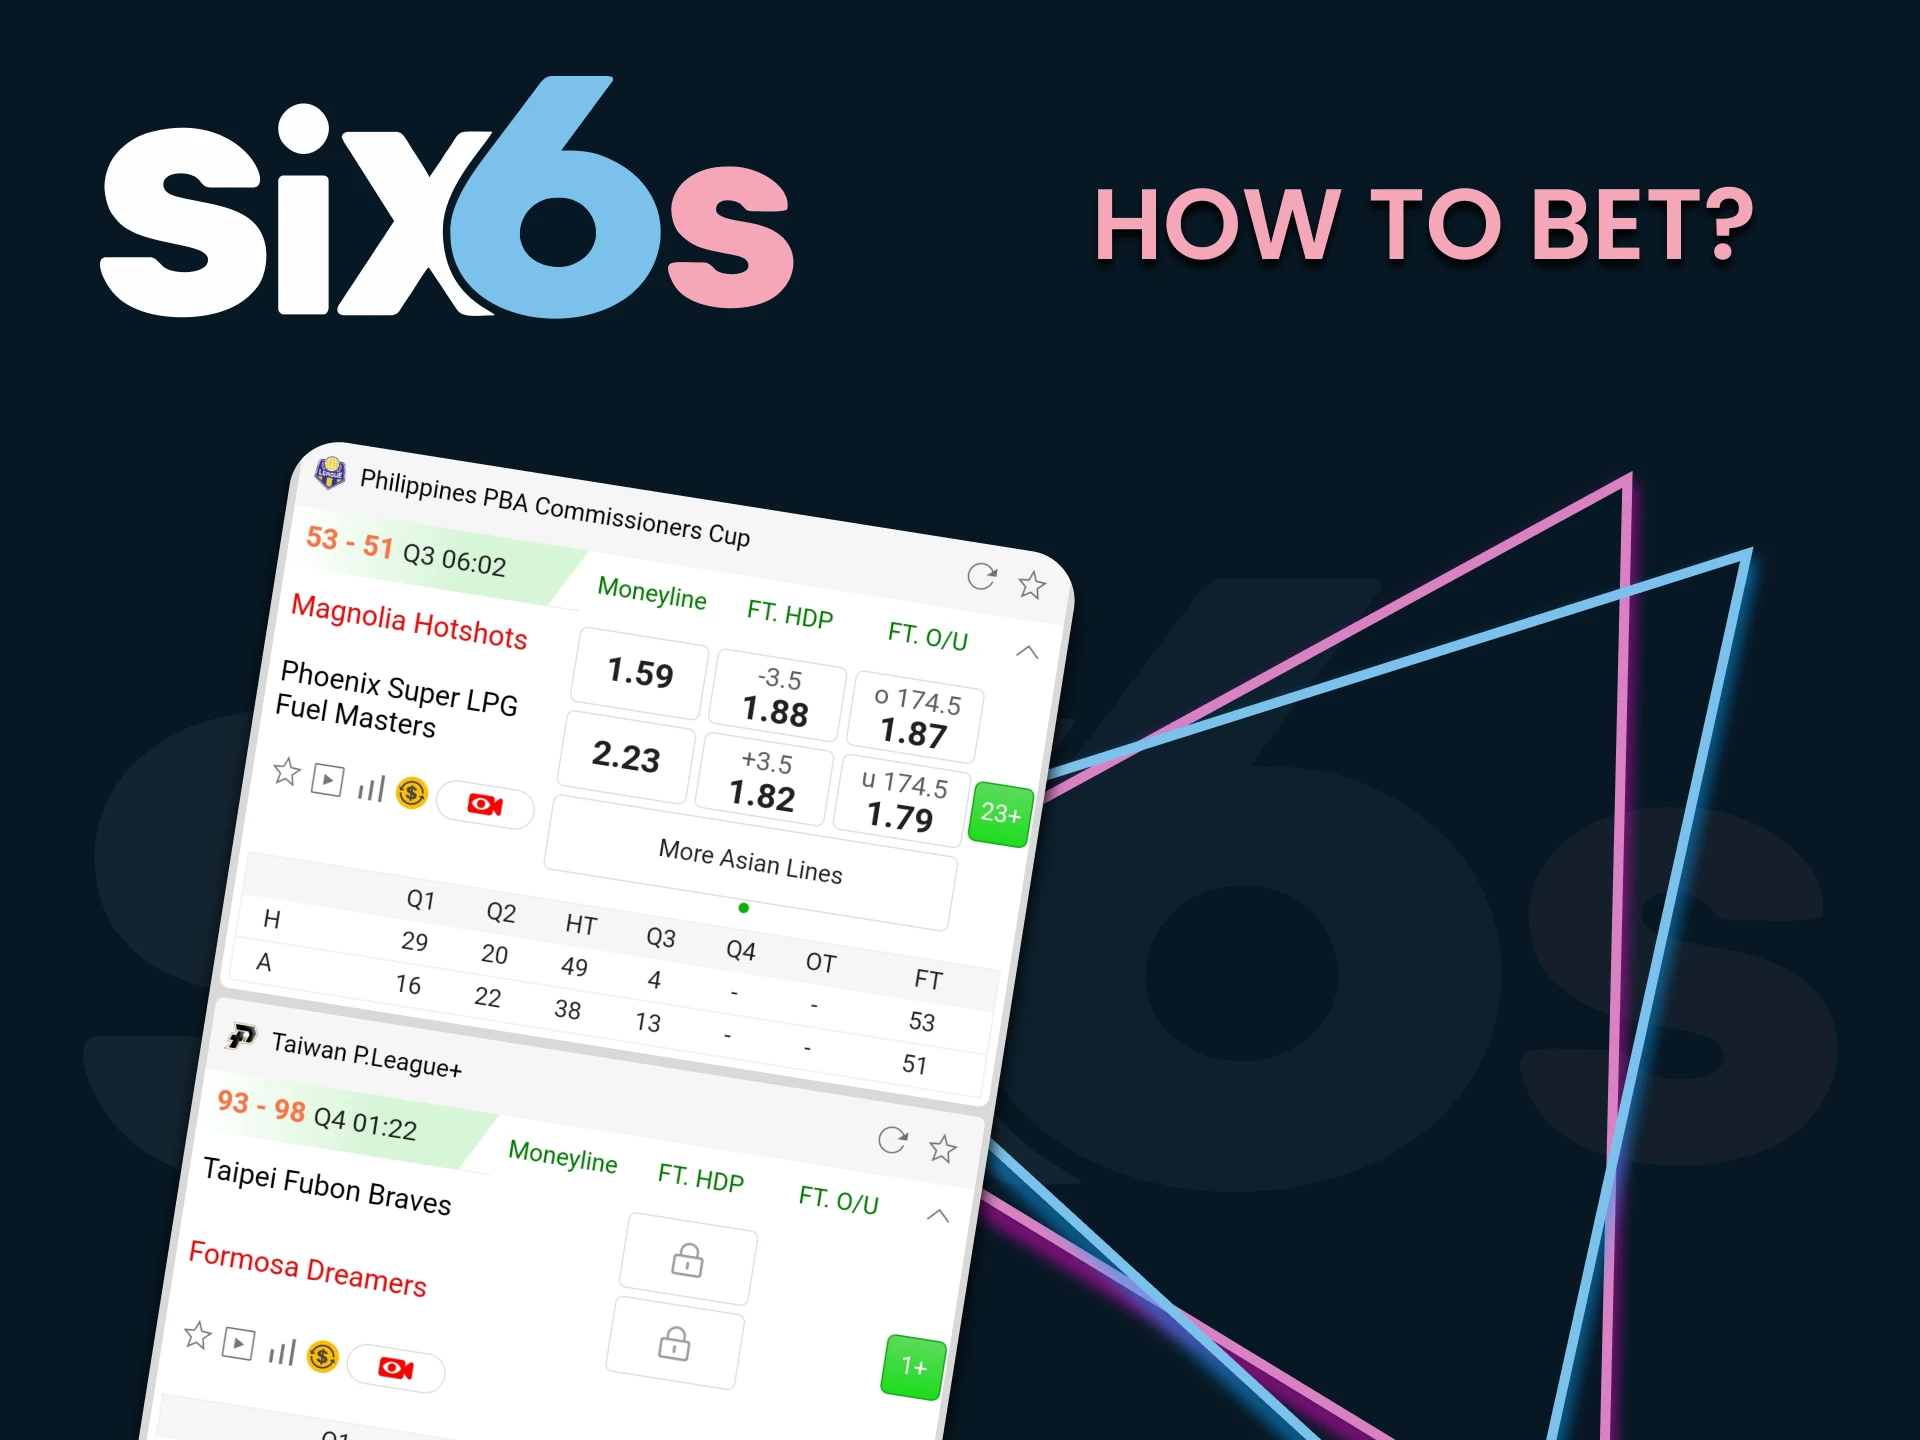 Go to the sports section for basketball betting from Six6s.